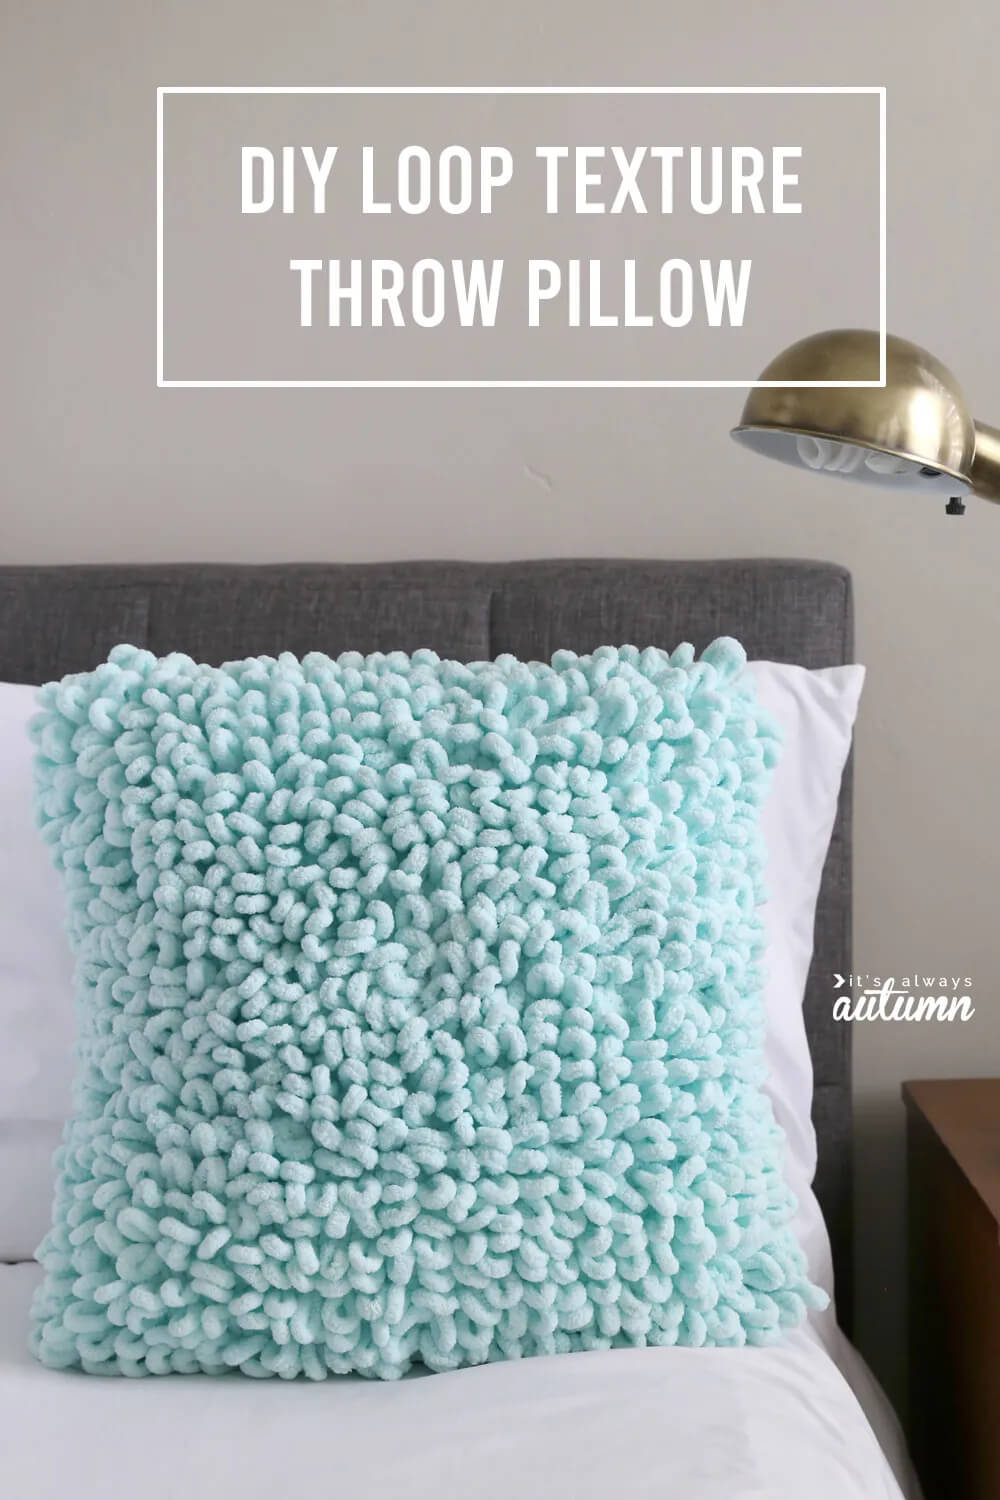 Adorable Loop Textured Pillow Craft Idea Using Yarn Yarn projects for beginners 